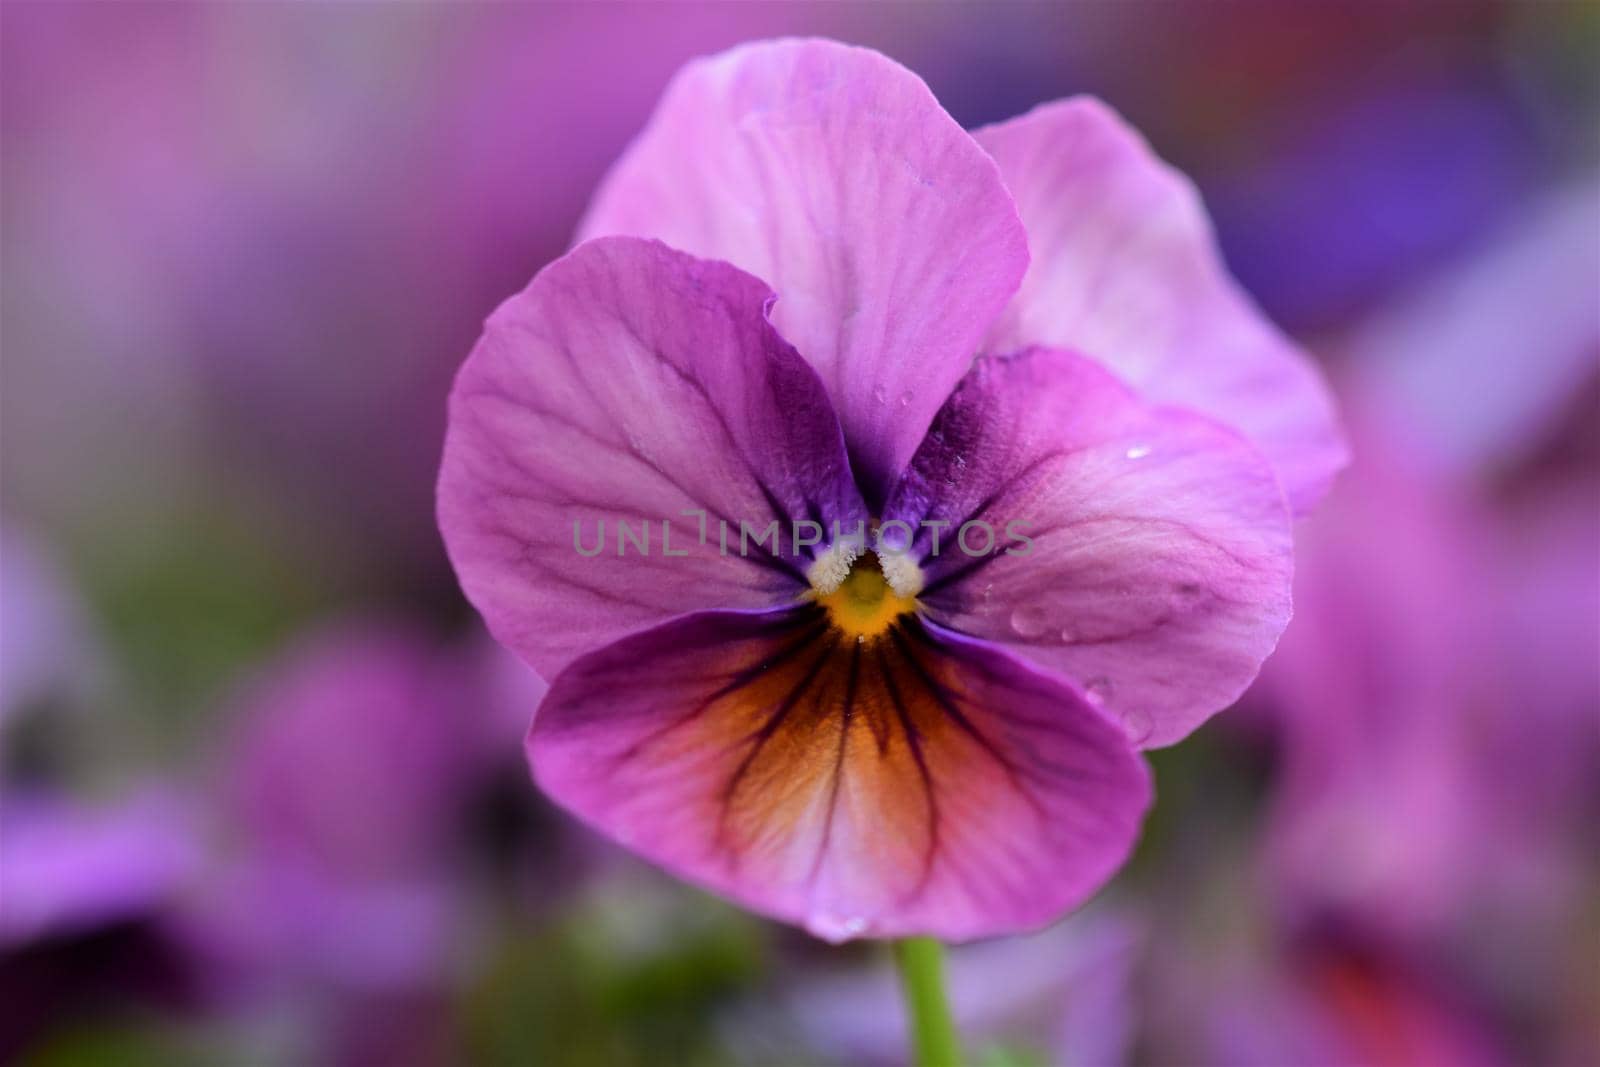 Close up of one purple pansy against a blurred background by Luise123